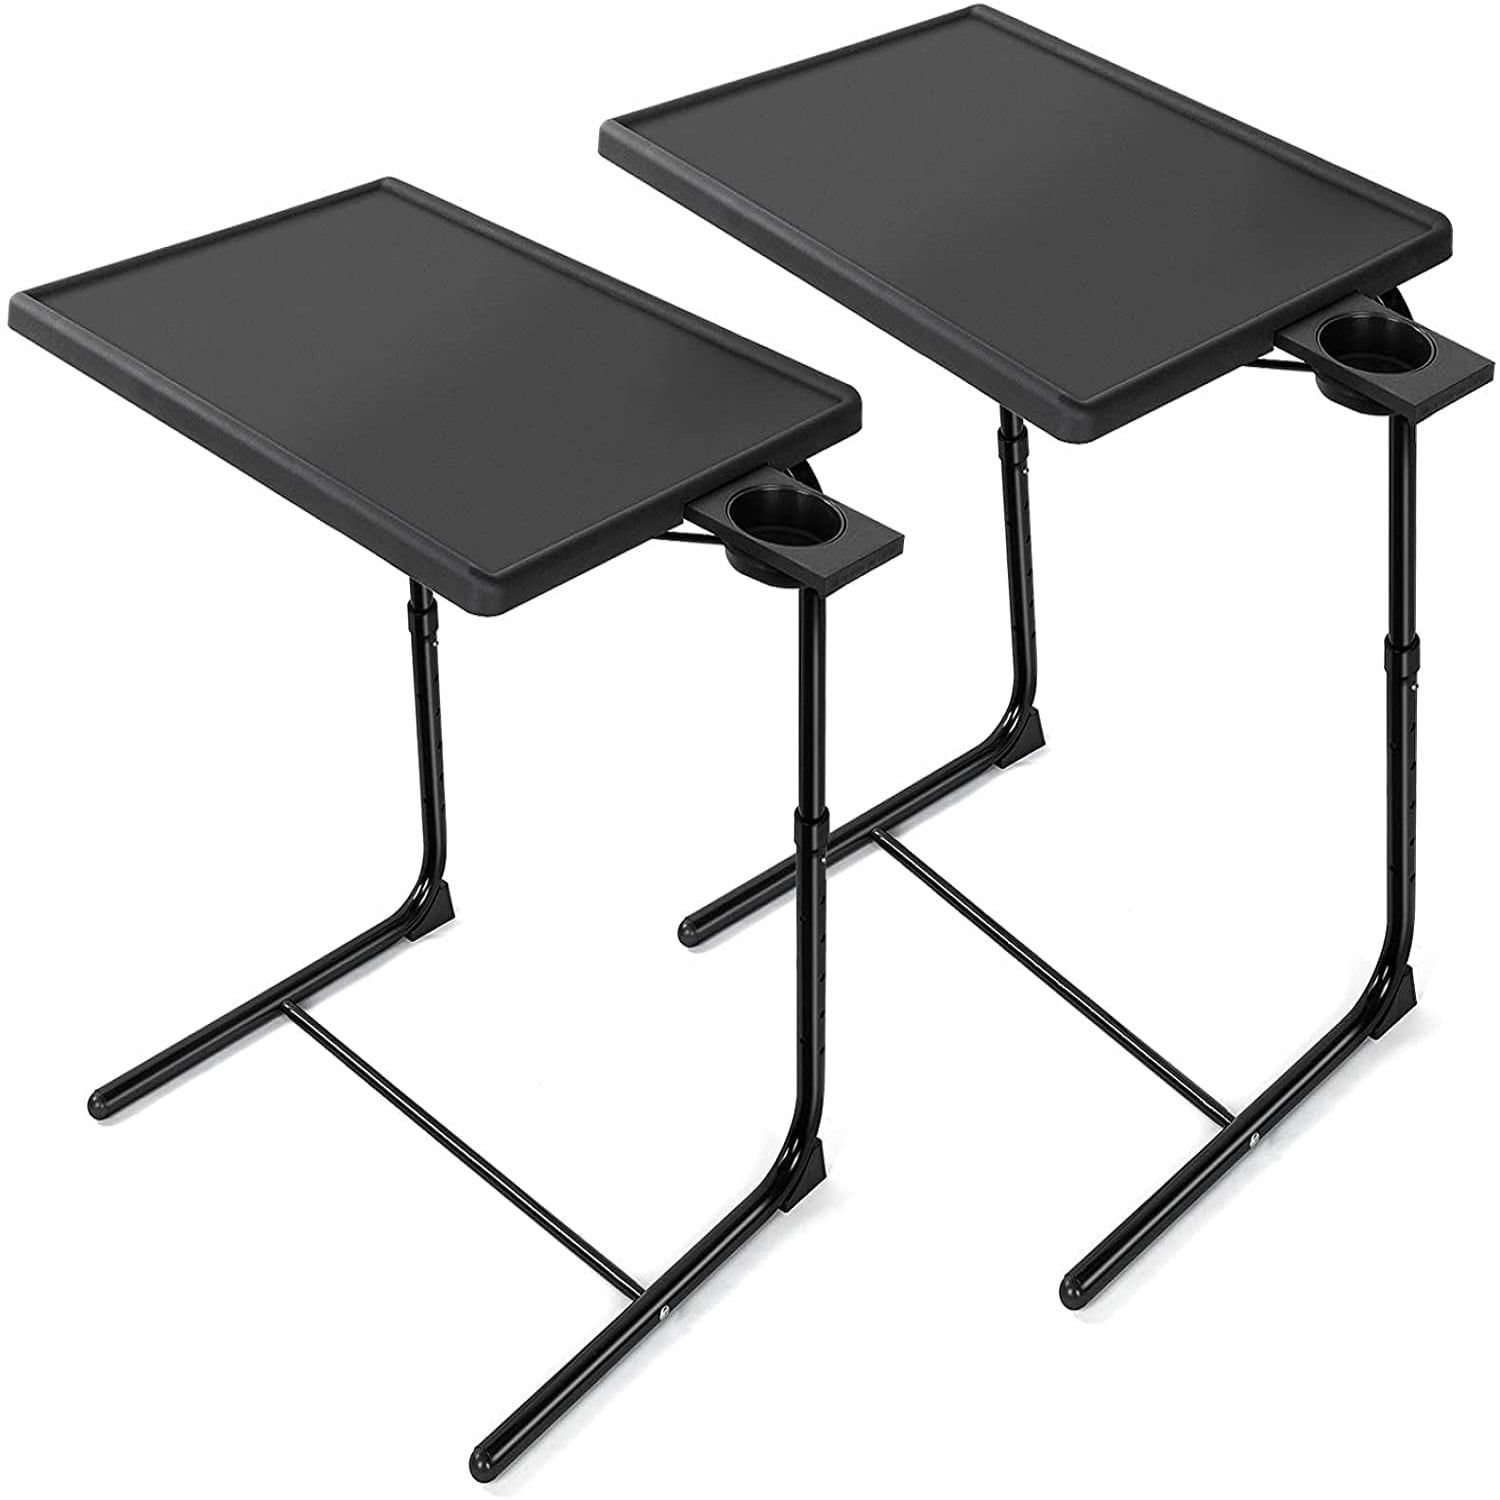 Buy 2 Pack Portable Foldable 6 Height & 3 Tilt Angles Adjustable Tv With Regard To Foldable Portable Adjustable Tv Stands (Gallery 4 of 20)